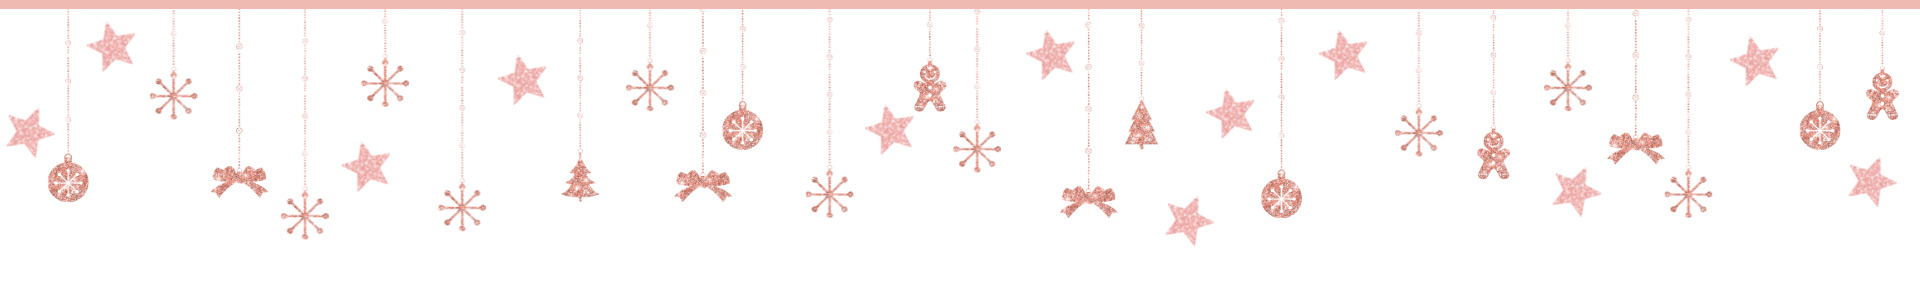 holiday ornament banner in rose gold tone